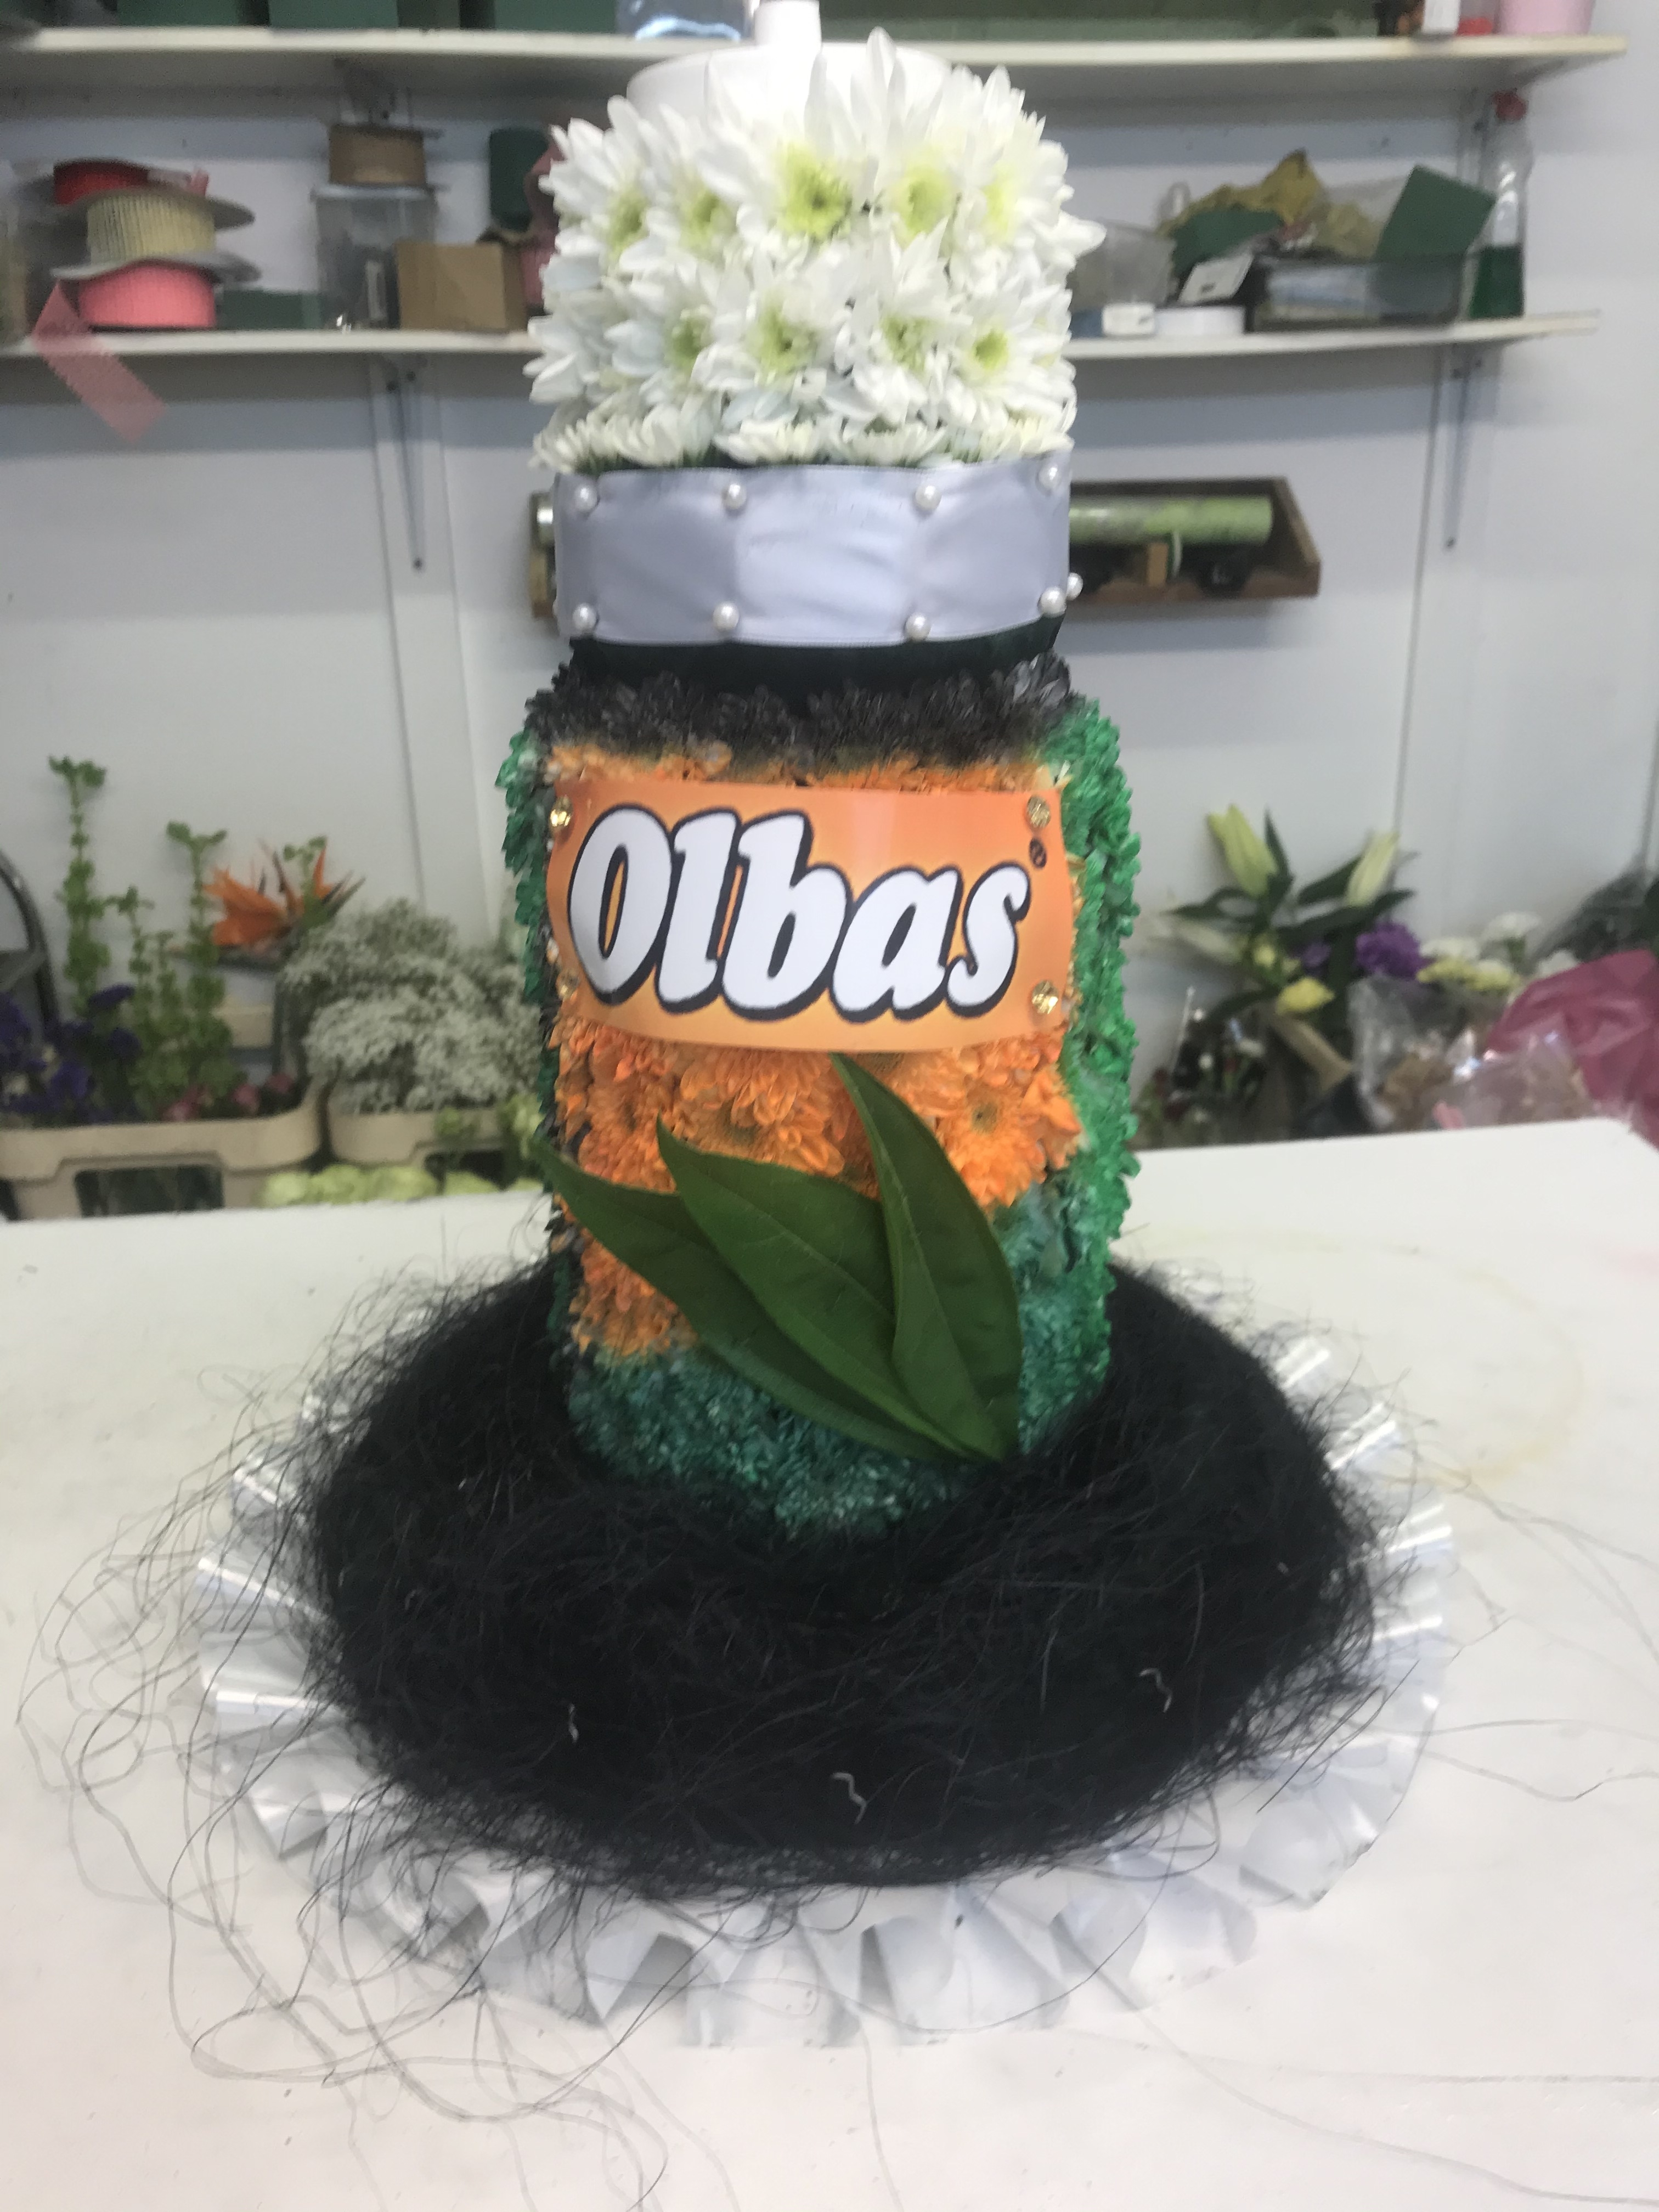 Olbas Oil made from flowers